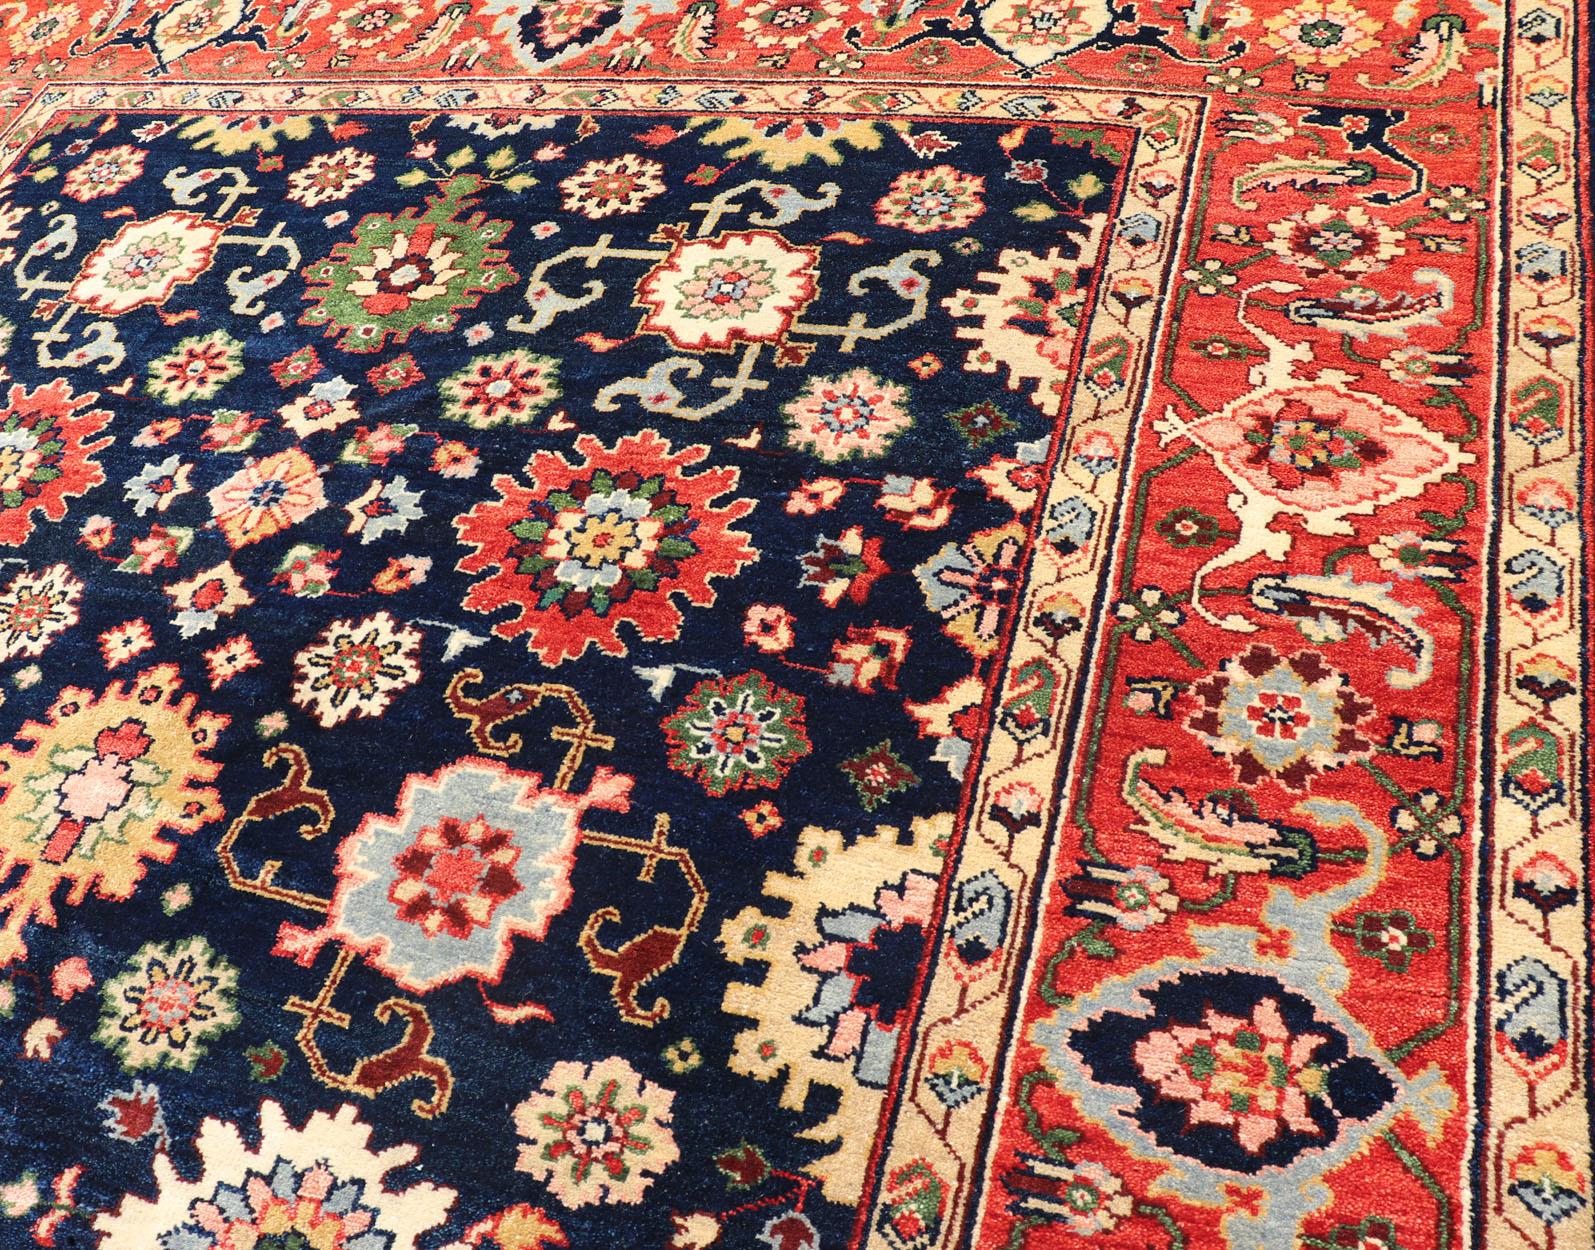 Keivan Woven Arts Sultanabad-Mahal Design in All-Over Floral Handgeknüpfter Teppich (Wolle) im Angebot